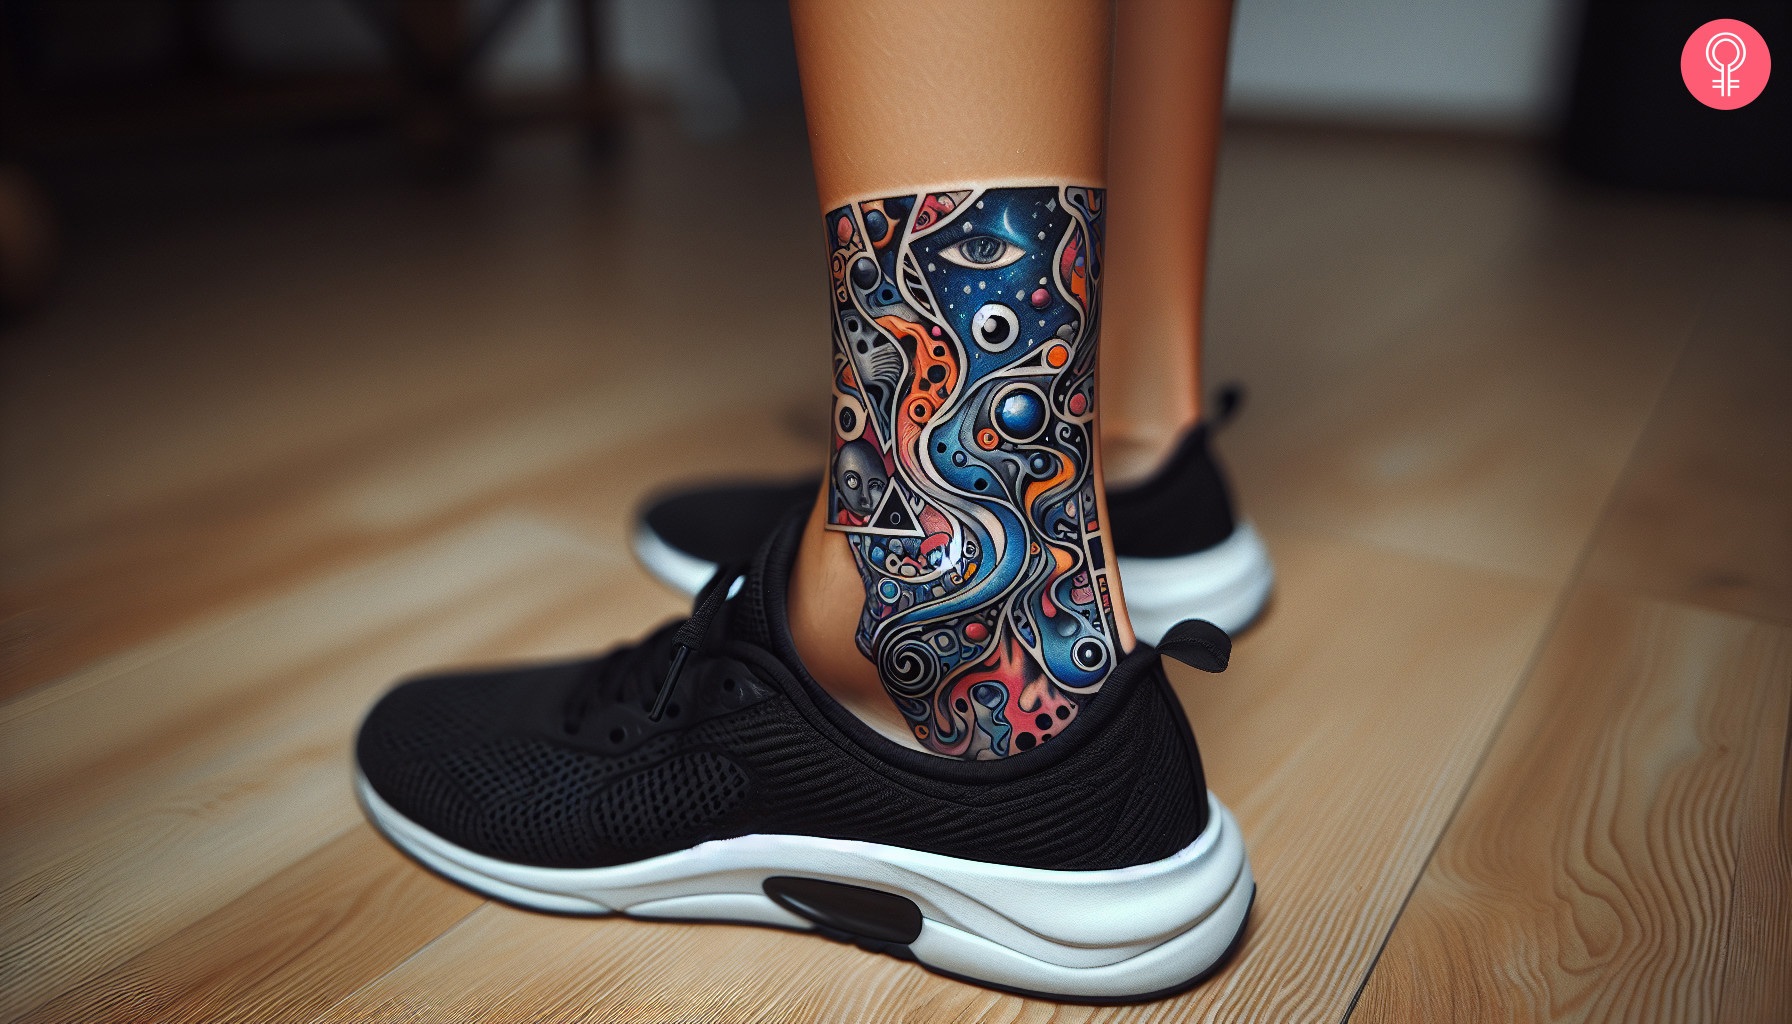  Woman with abstract surrealism tattoo on her ankle